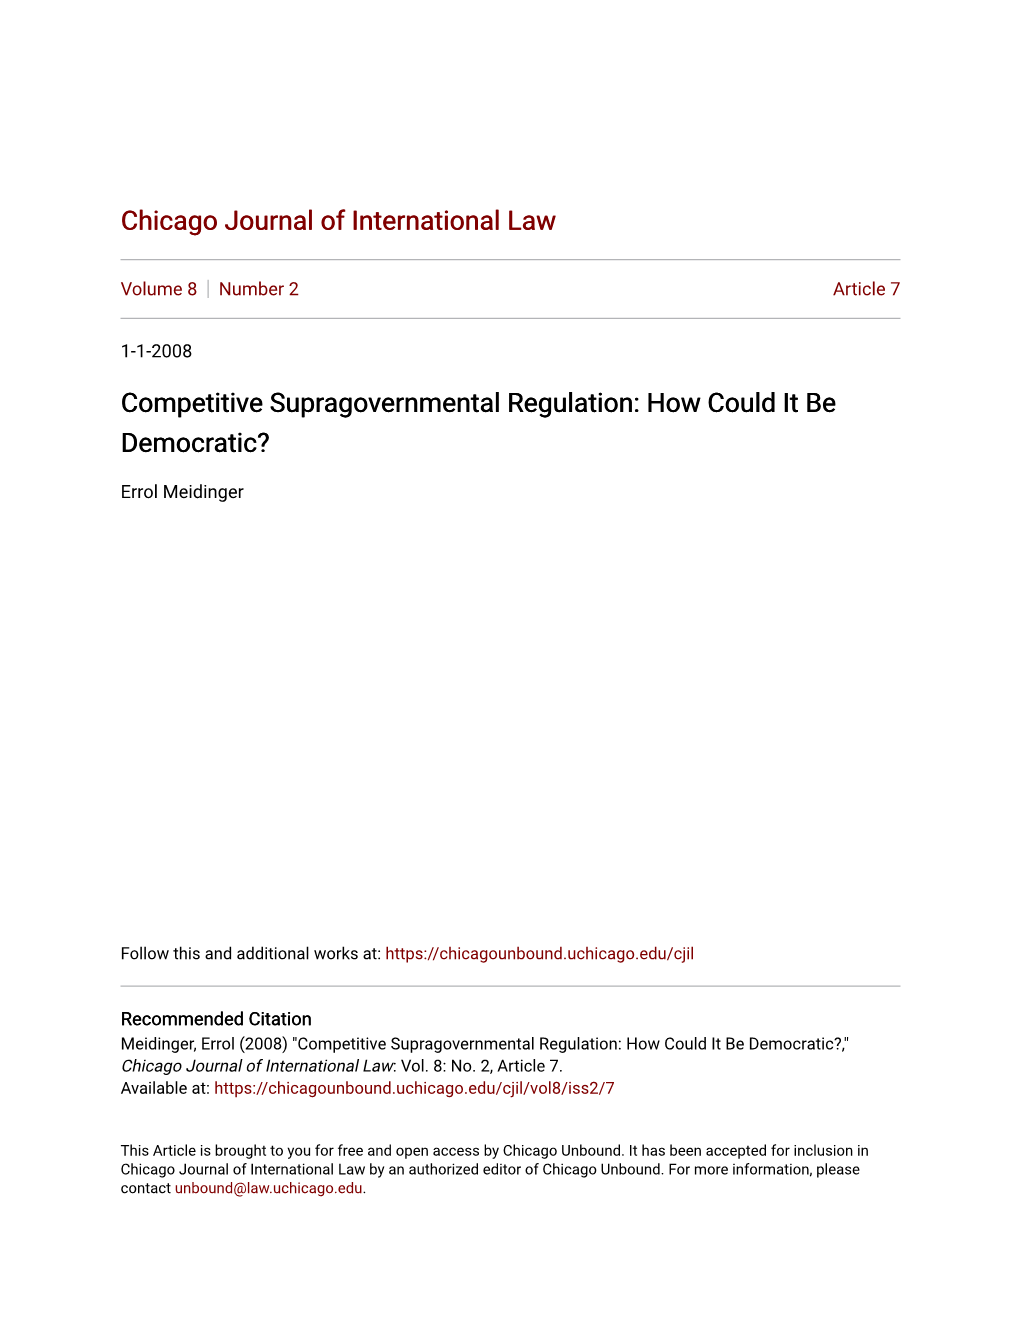 Competitive Supragovernmental Regulation: How Could It Be Democratic?